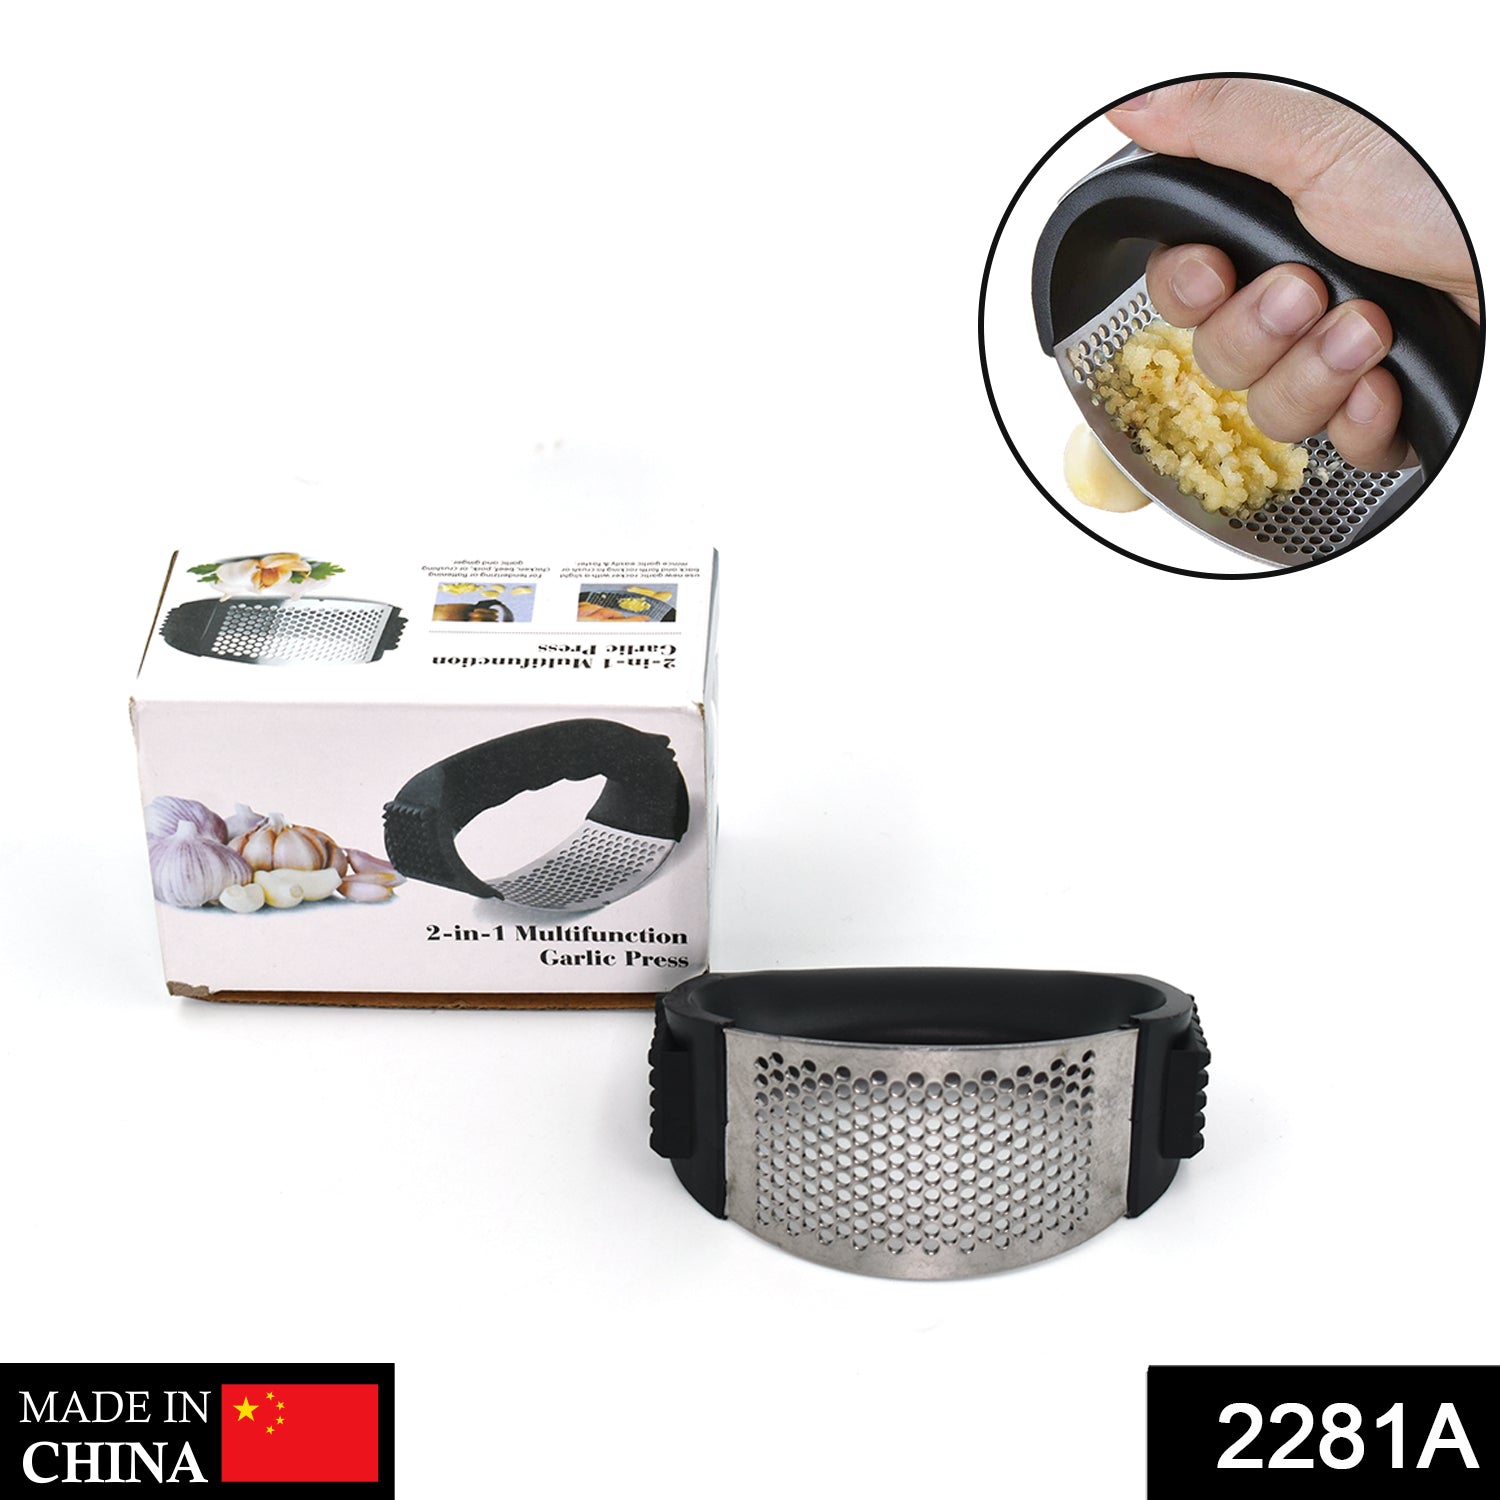 2281A Round Garlic Press For Mashing Garlic Pieces While Making Food Stuffs And Items In Homes Etc. DeoDap